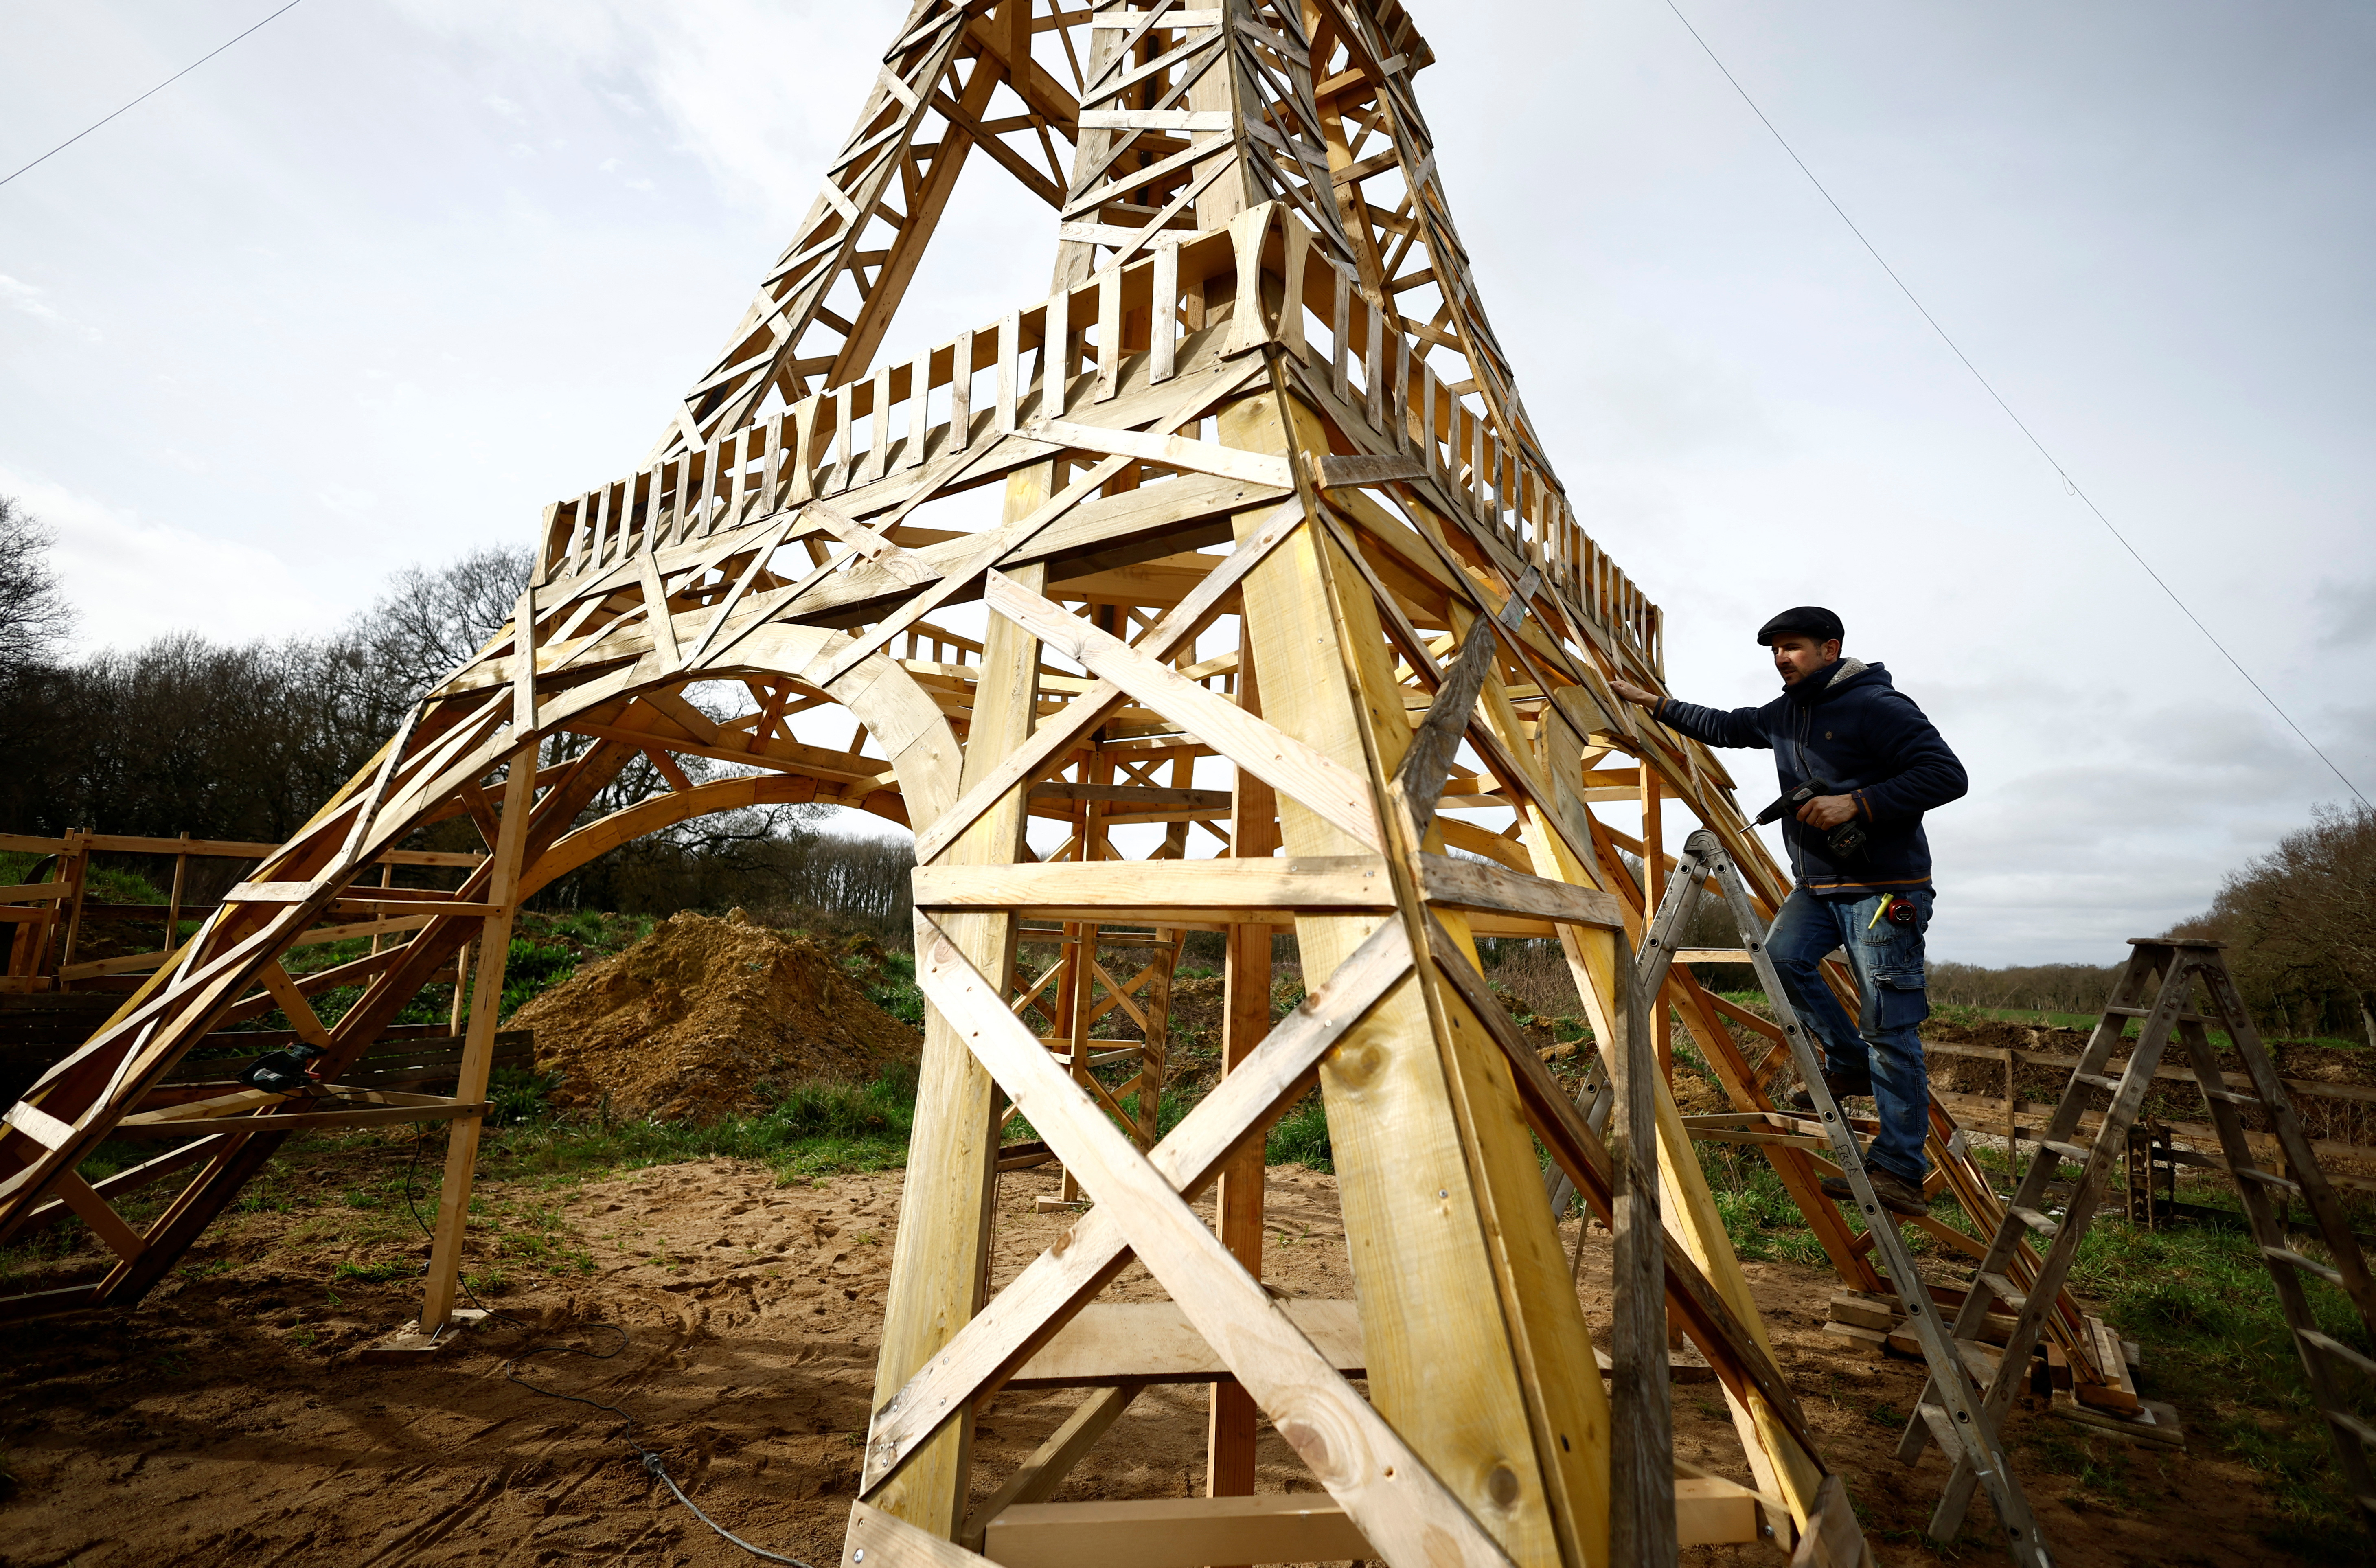 A French carpenter builds a replica of the Eiffel Tower from recycled wood in western France